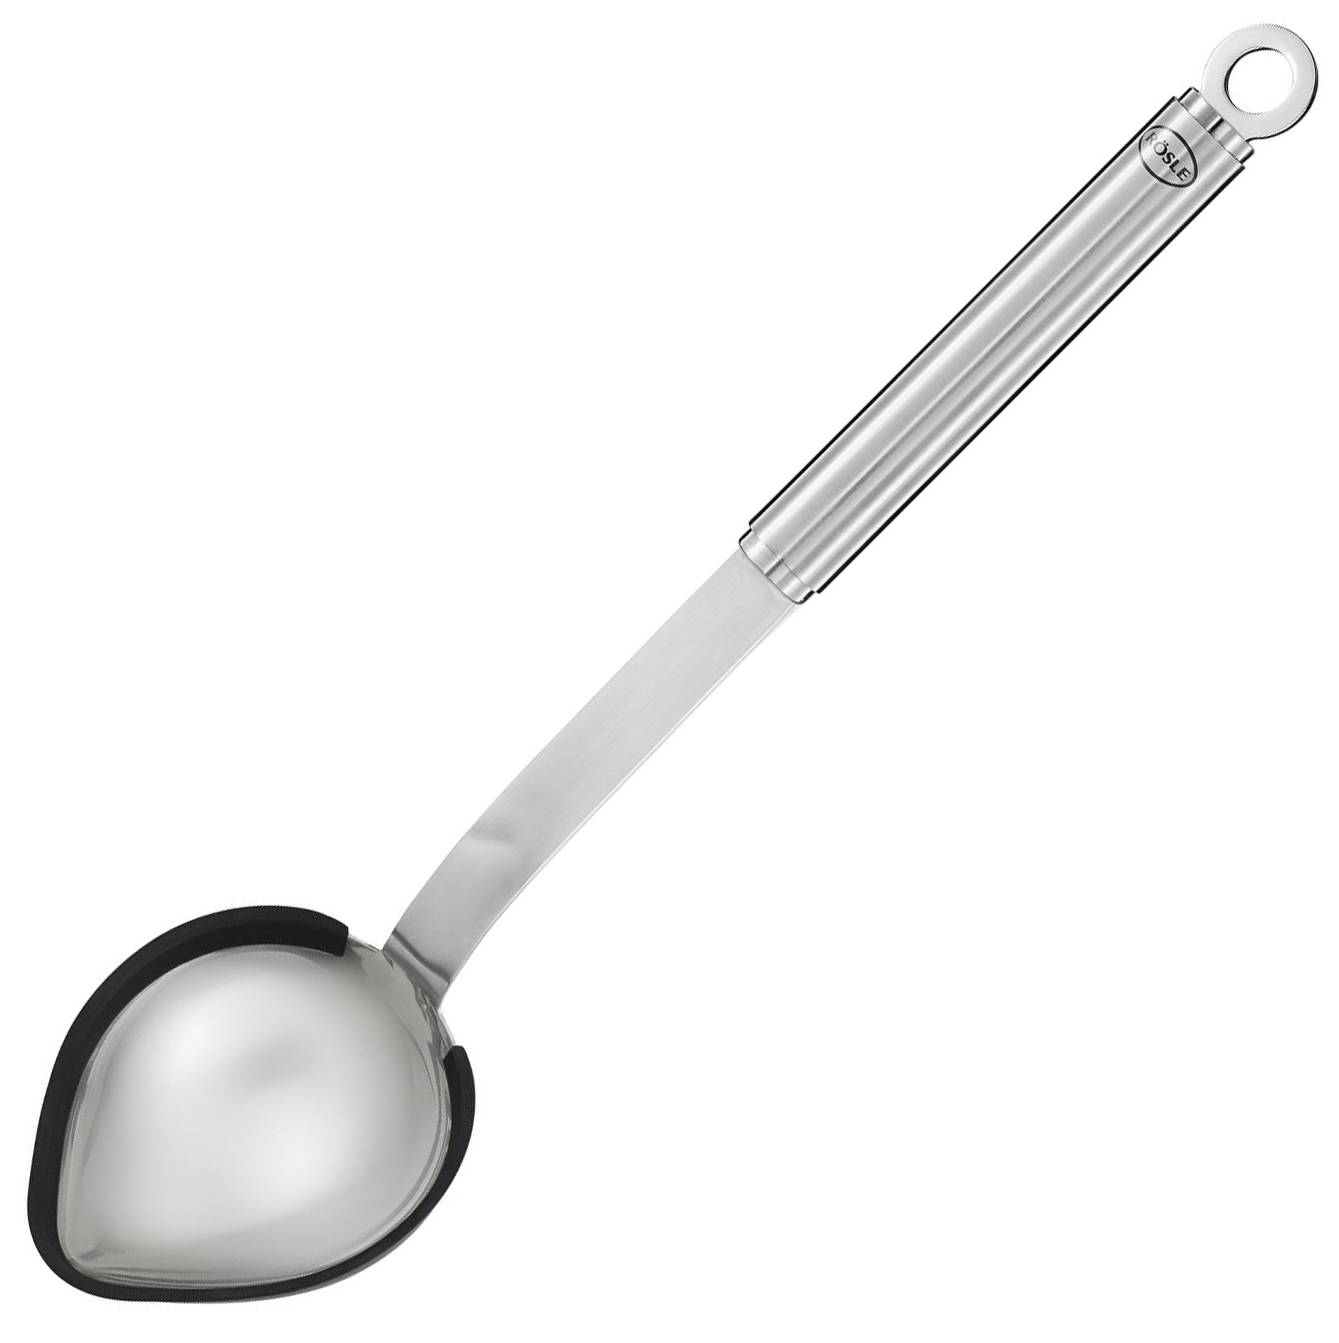 Kitchen Stainless Steel Large Soup Ladle Spoon Cooking Tool Utensils 27.5cm 